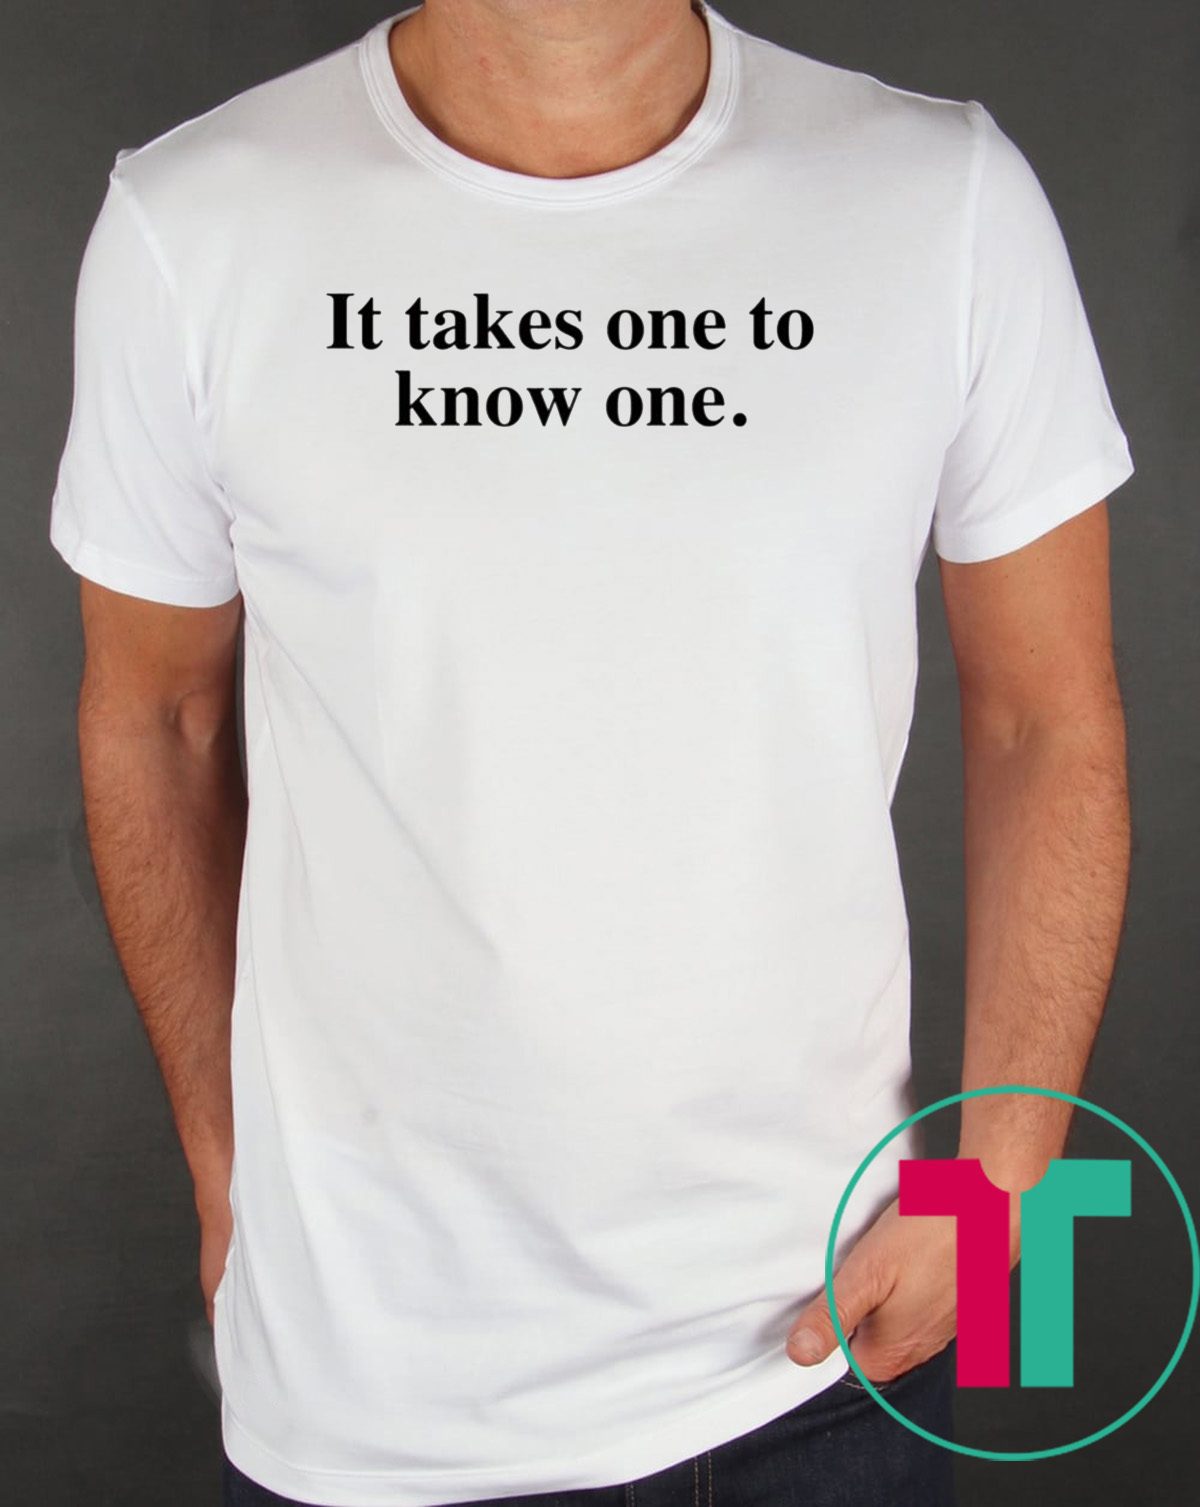 Takes One to Know One T-Shirt